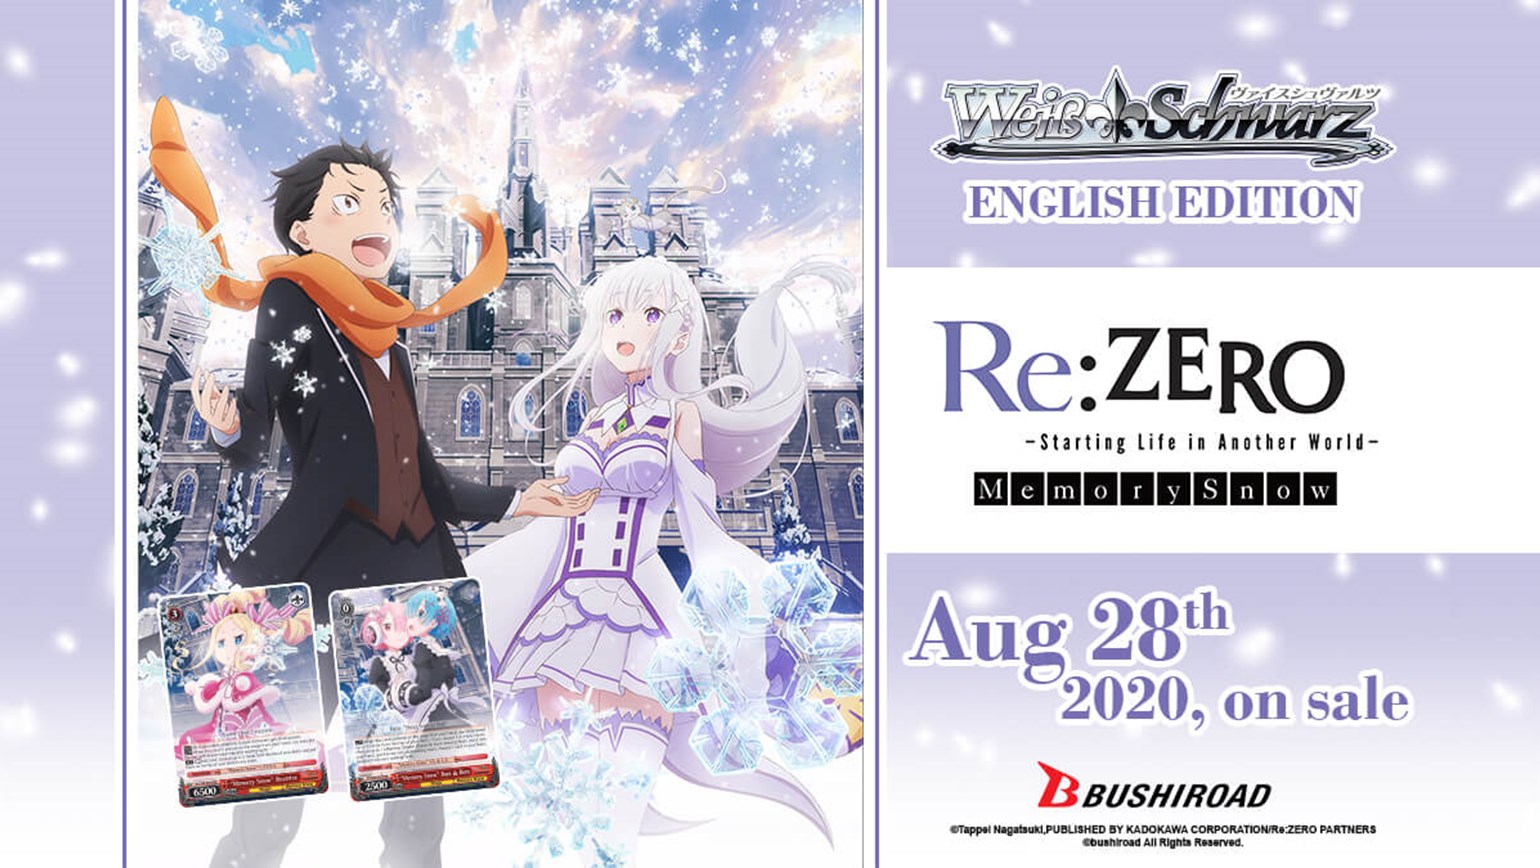 Weiss Schwarz: Booster Pack Re:ZERO -Starting Life in Another World- Memory Snow On Sale August 28th!